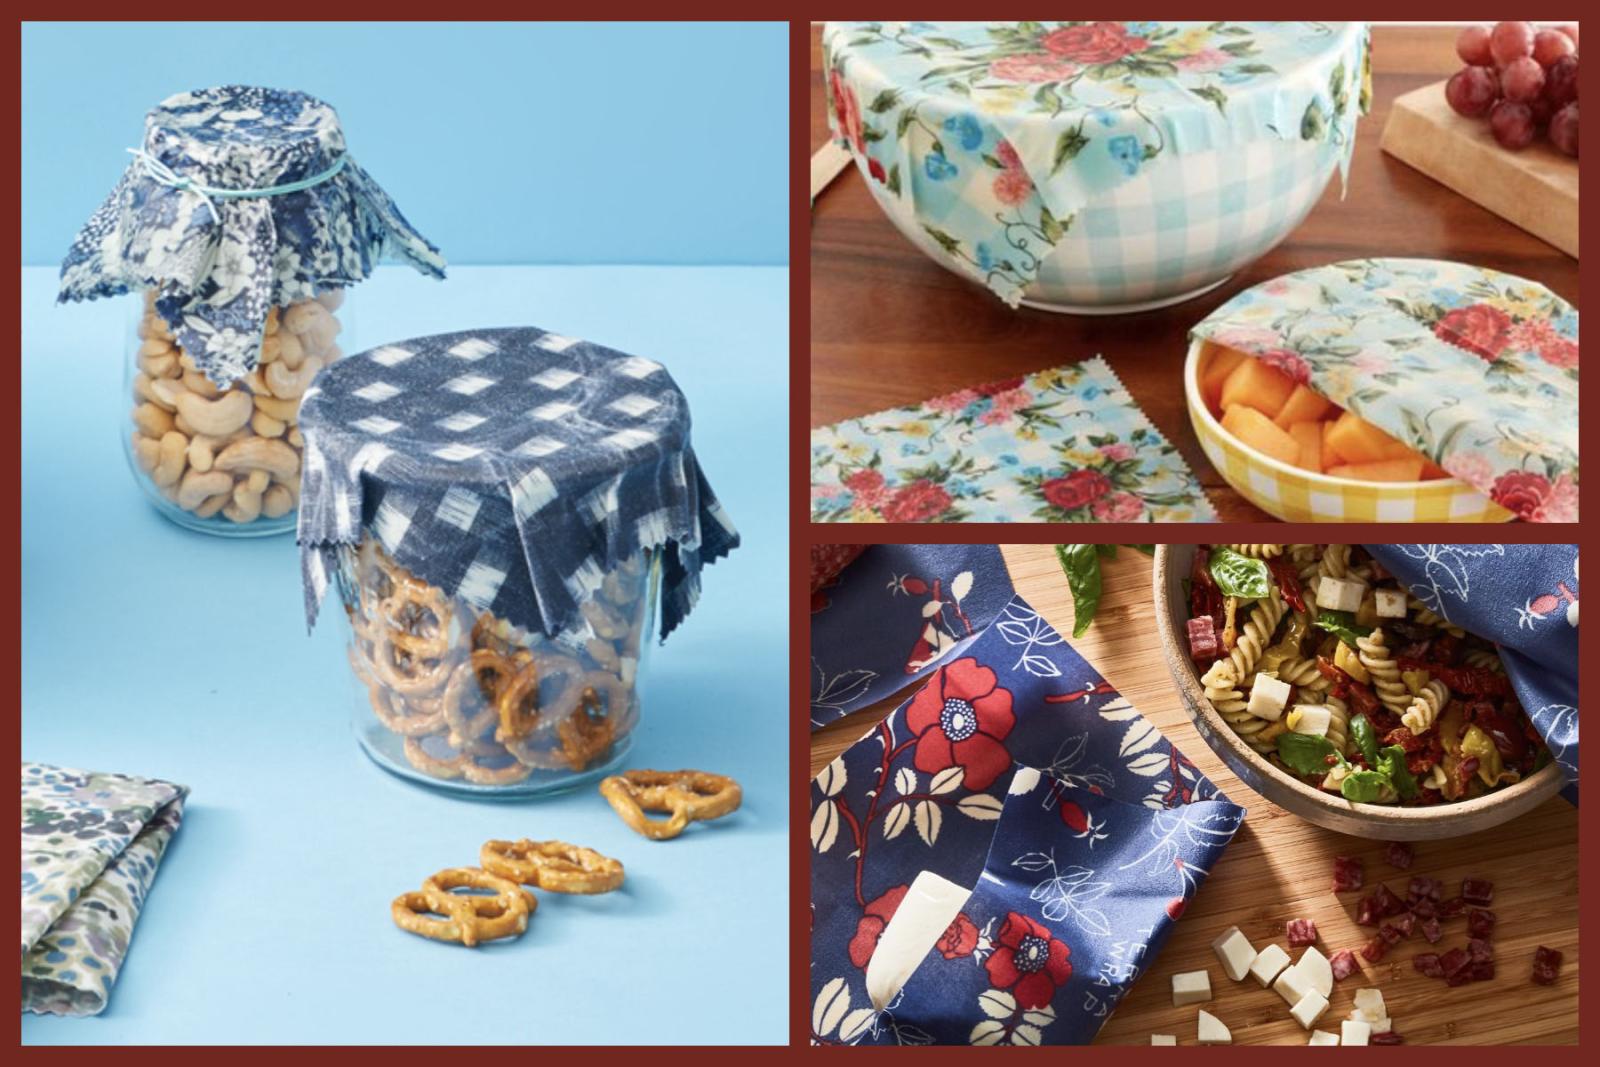 This is a collage of three images showing various food items covered with fabric bowl covers. The first shows a glass jar of cashews and pretzels with a blue and white checked cover; the second, a bowl of fruit and a bowl of chips with floral-patterned covers; and the third, a bowl of pasta salad with a red and blue floral cover.